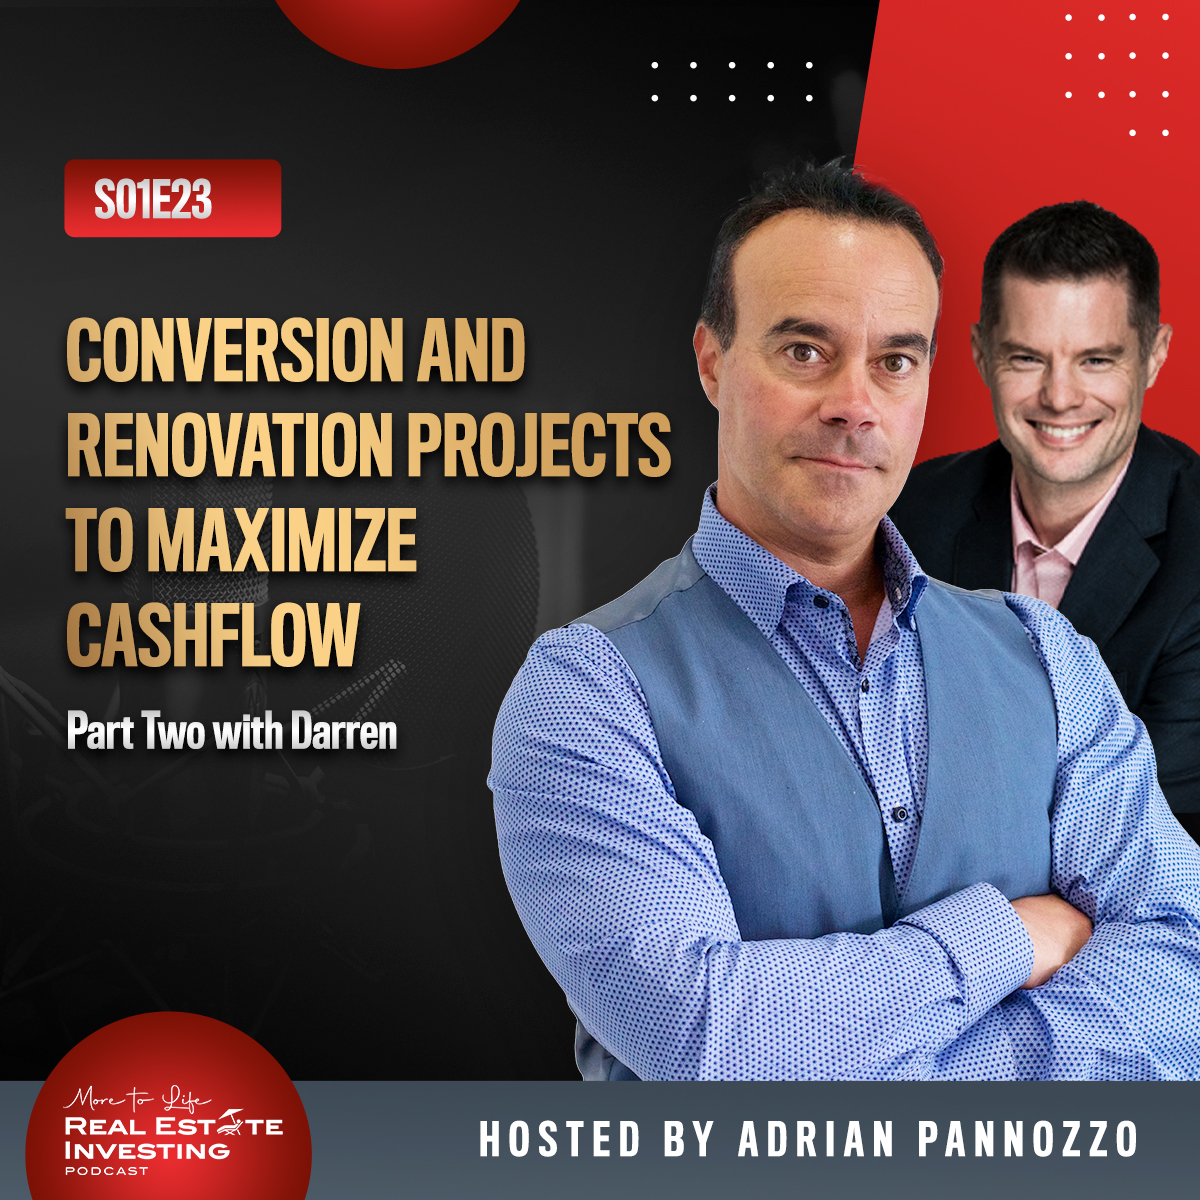 Conversion and Renovation Projects to Maximize Cashflow with Darren Voros - Part 2